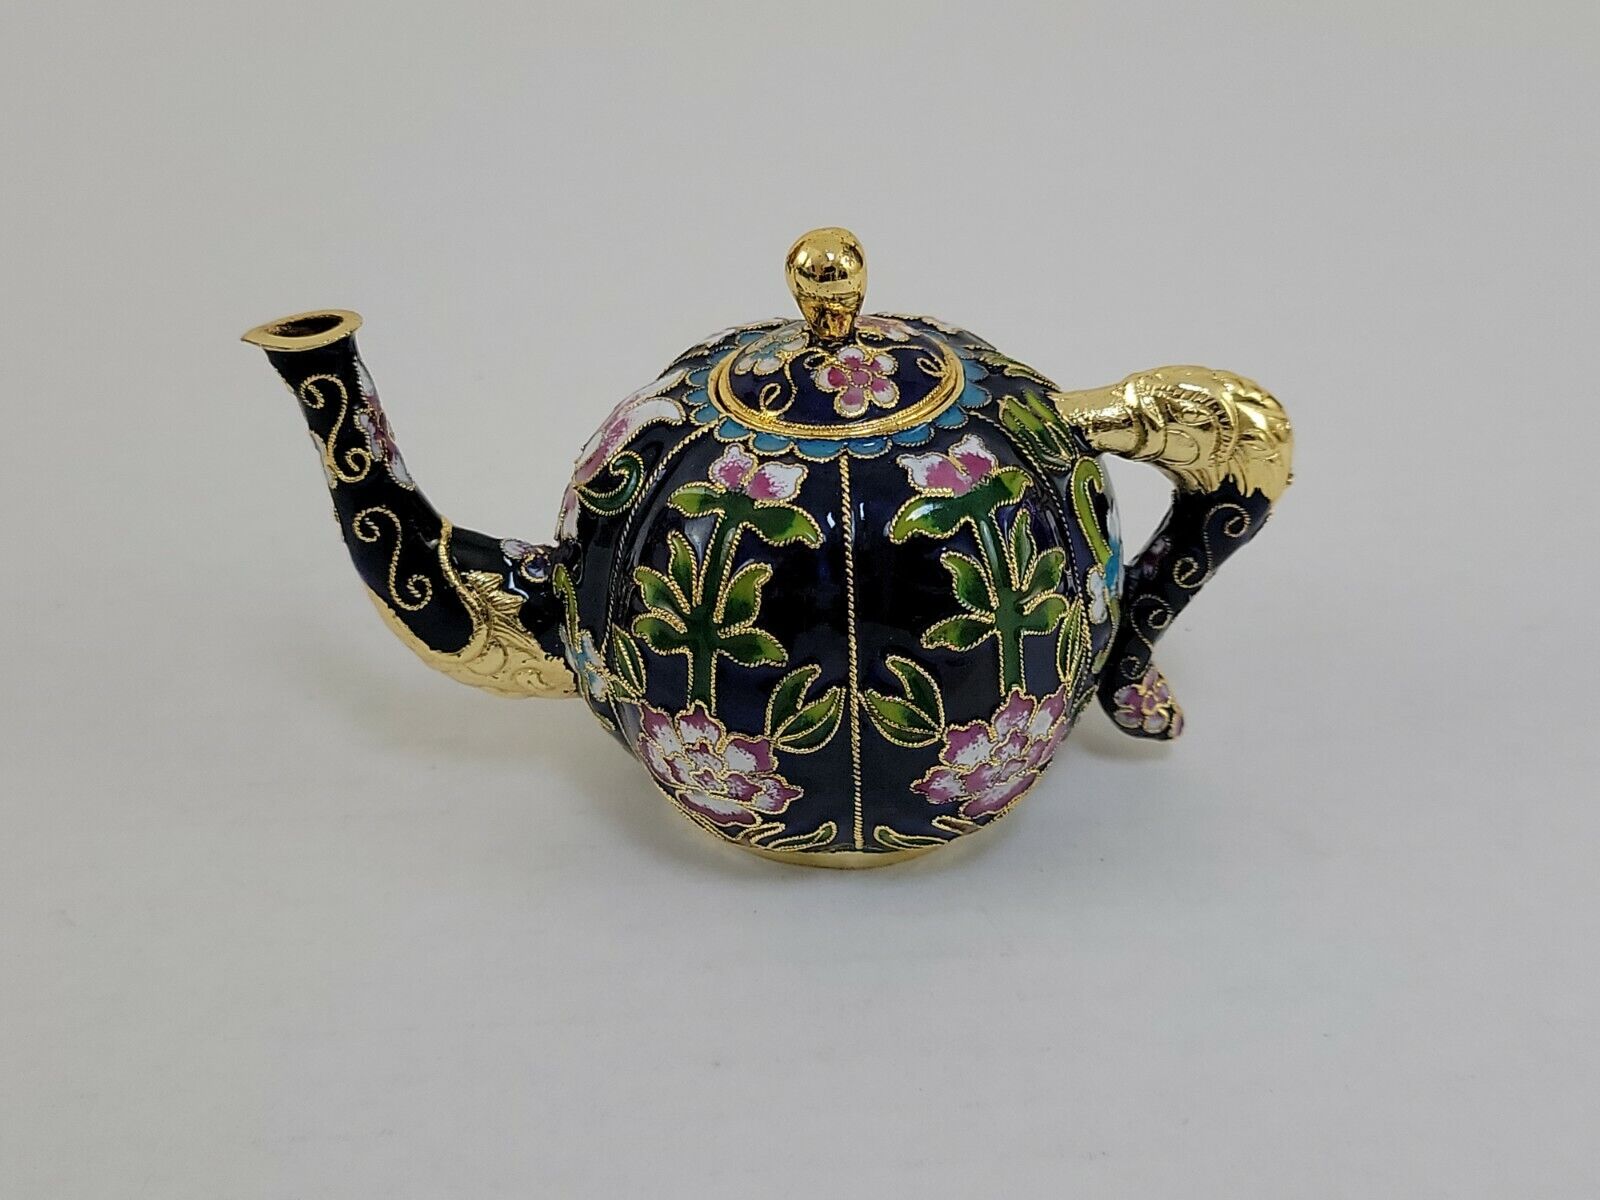 Cloisonne Of Oriental Treasures Ornate Mini Teapot With Original Box and Paper